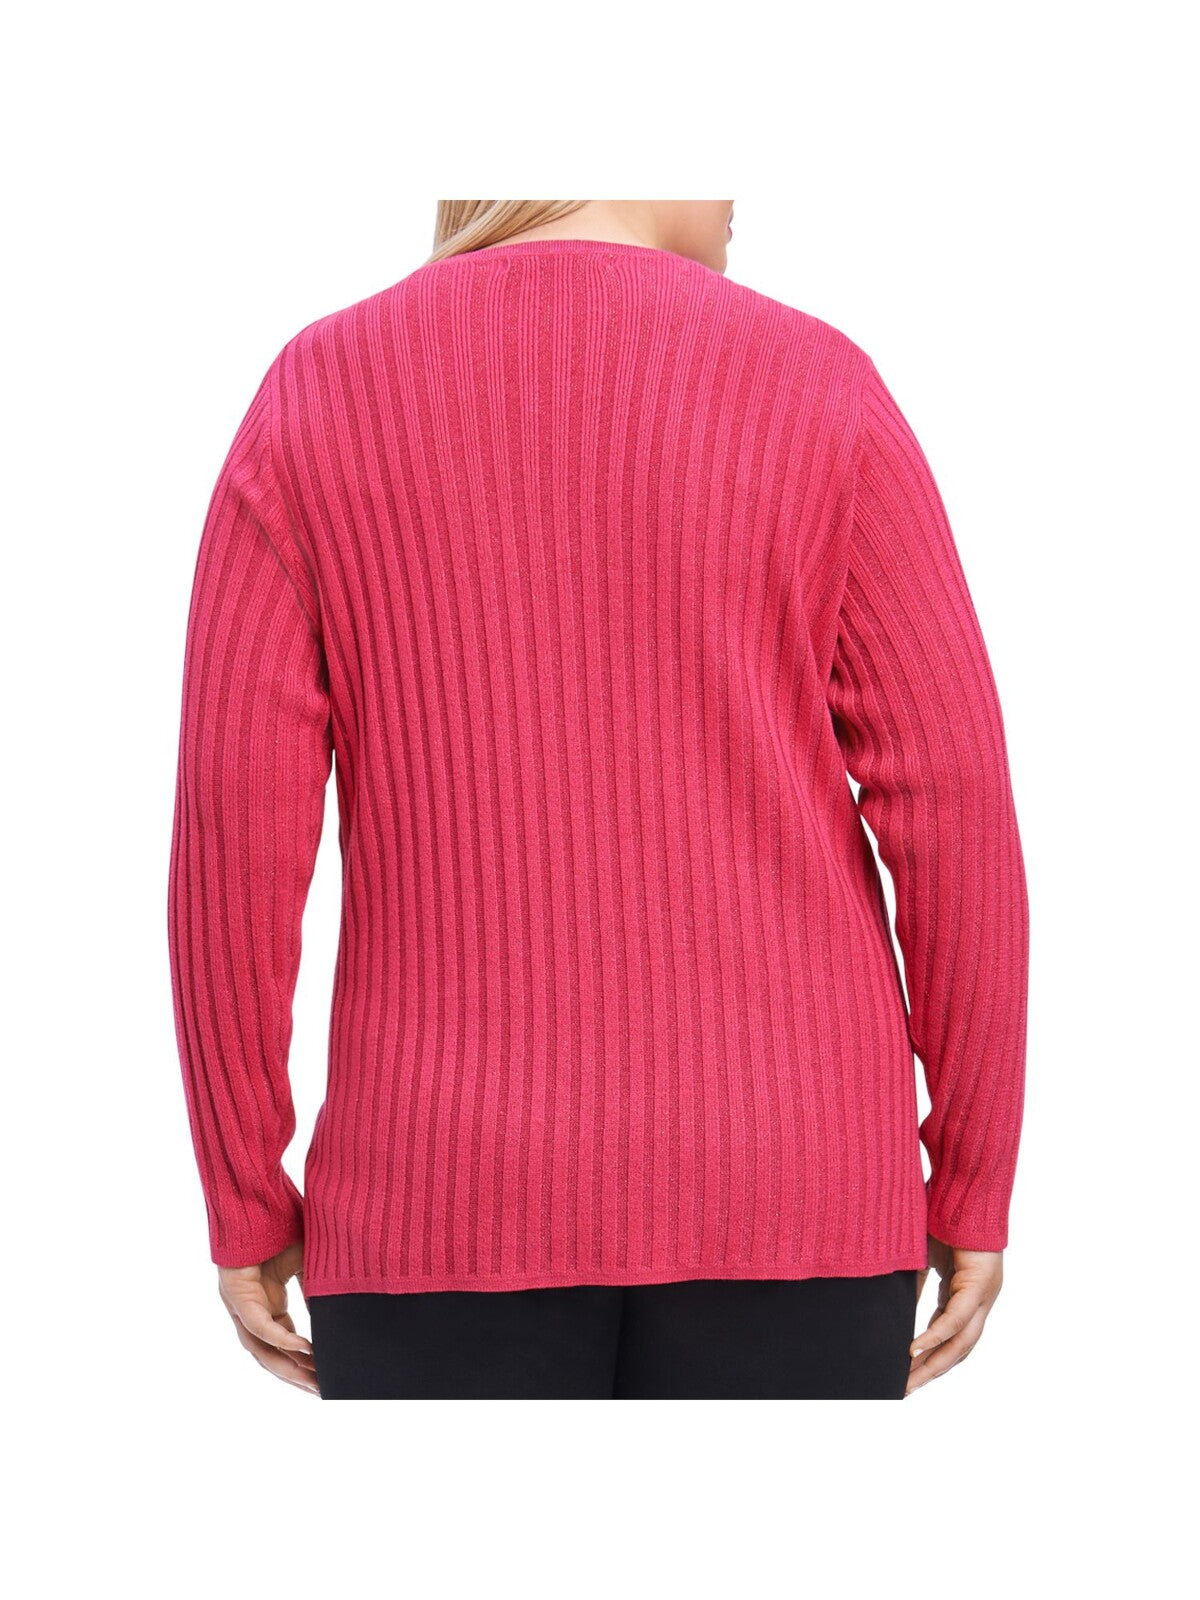 FOXCROFT Womens Pink Glitter Ribbed Long Sleeve Crew Neck Sweater Plus 2X